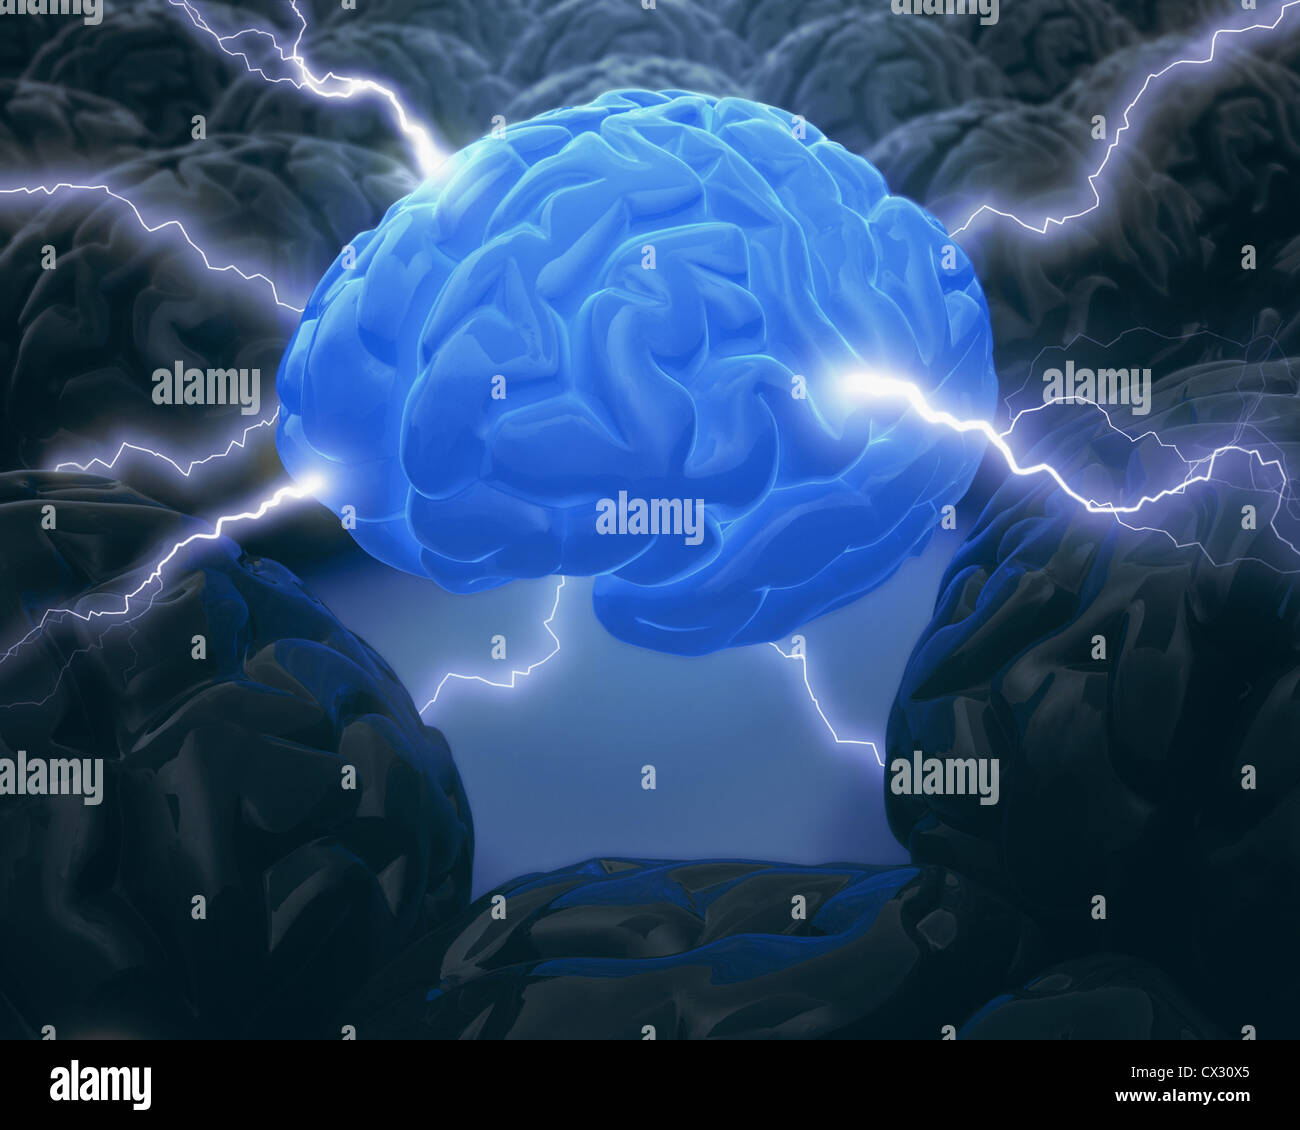 Concept of leadership. The brain in the center, has the power to lead. Stock Photo